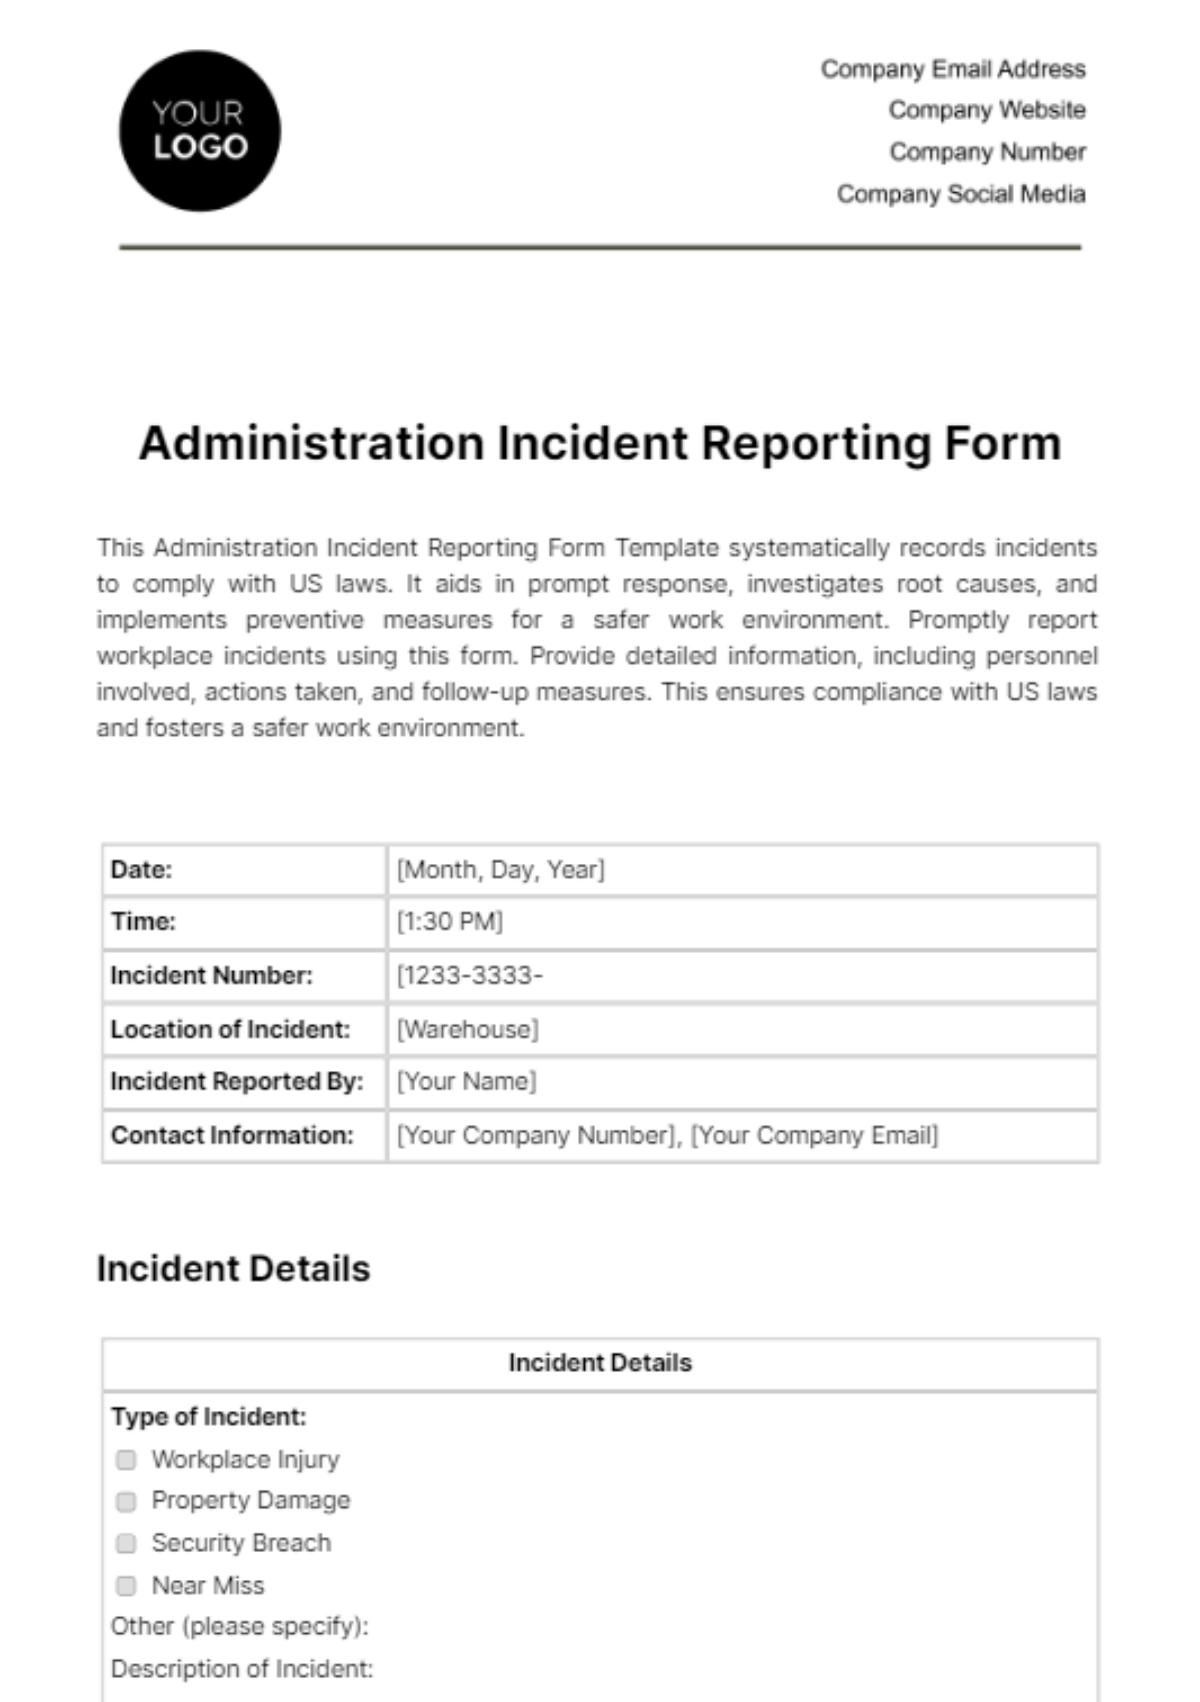 Free Administration Incident Reporting Form Template